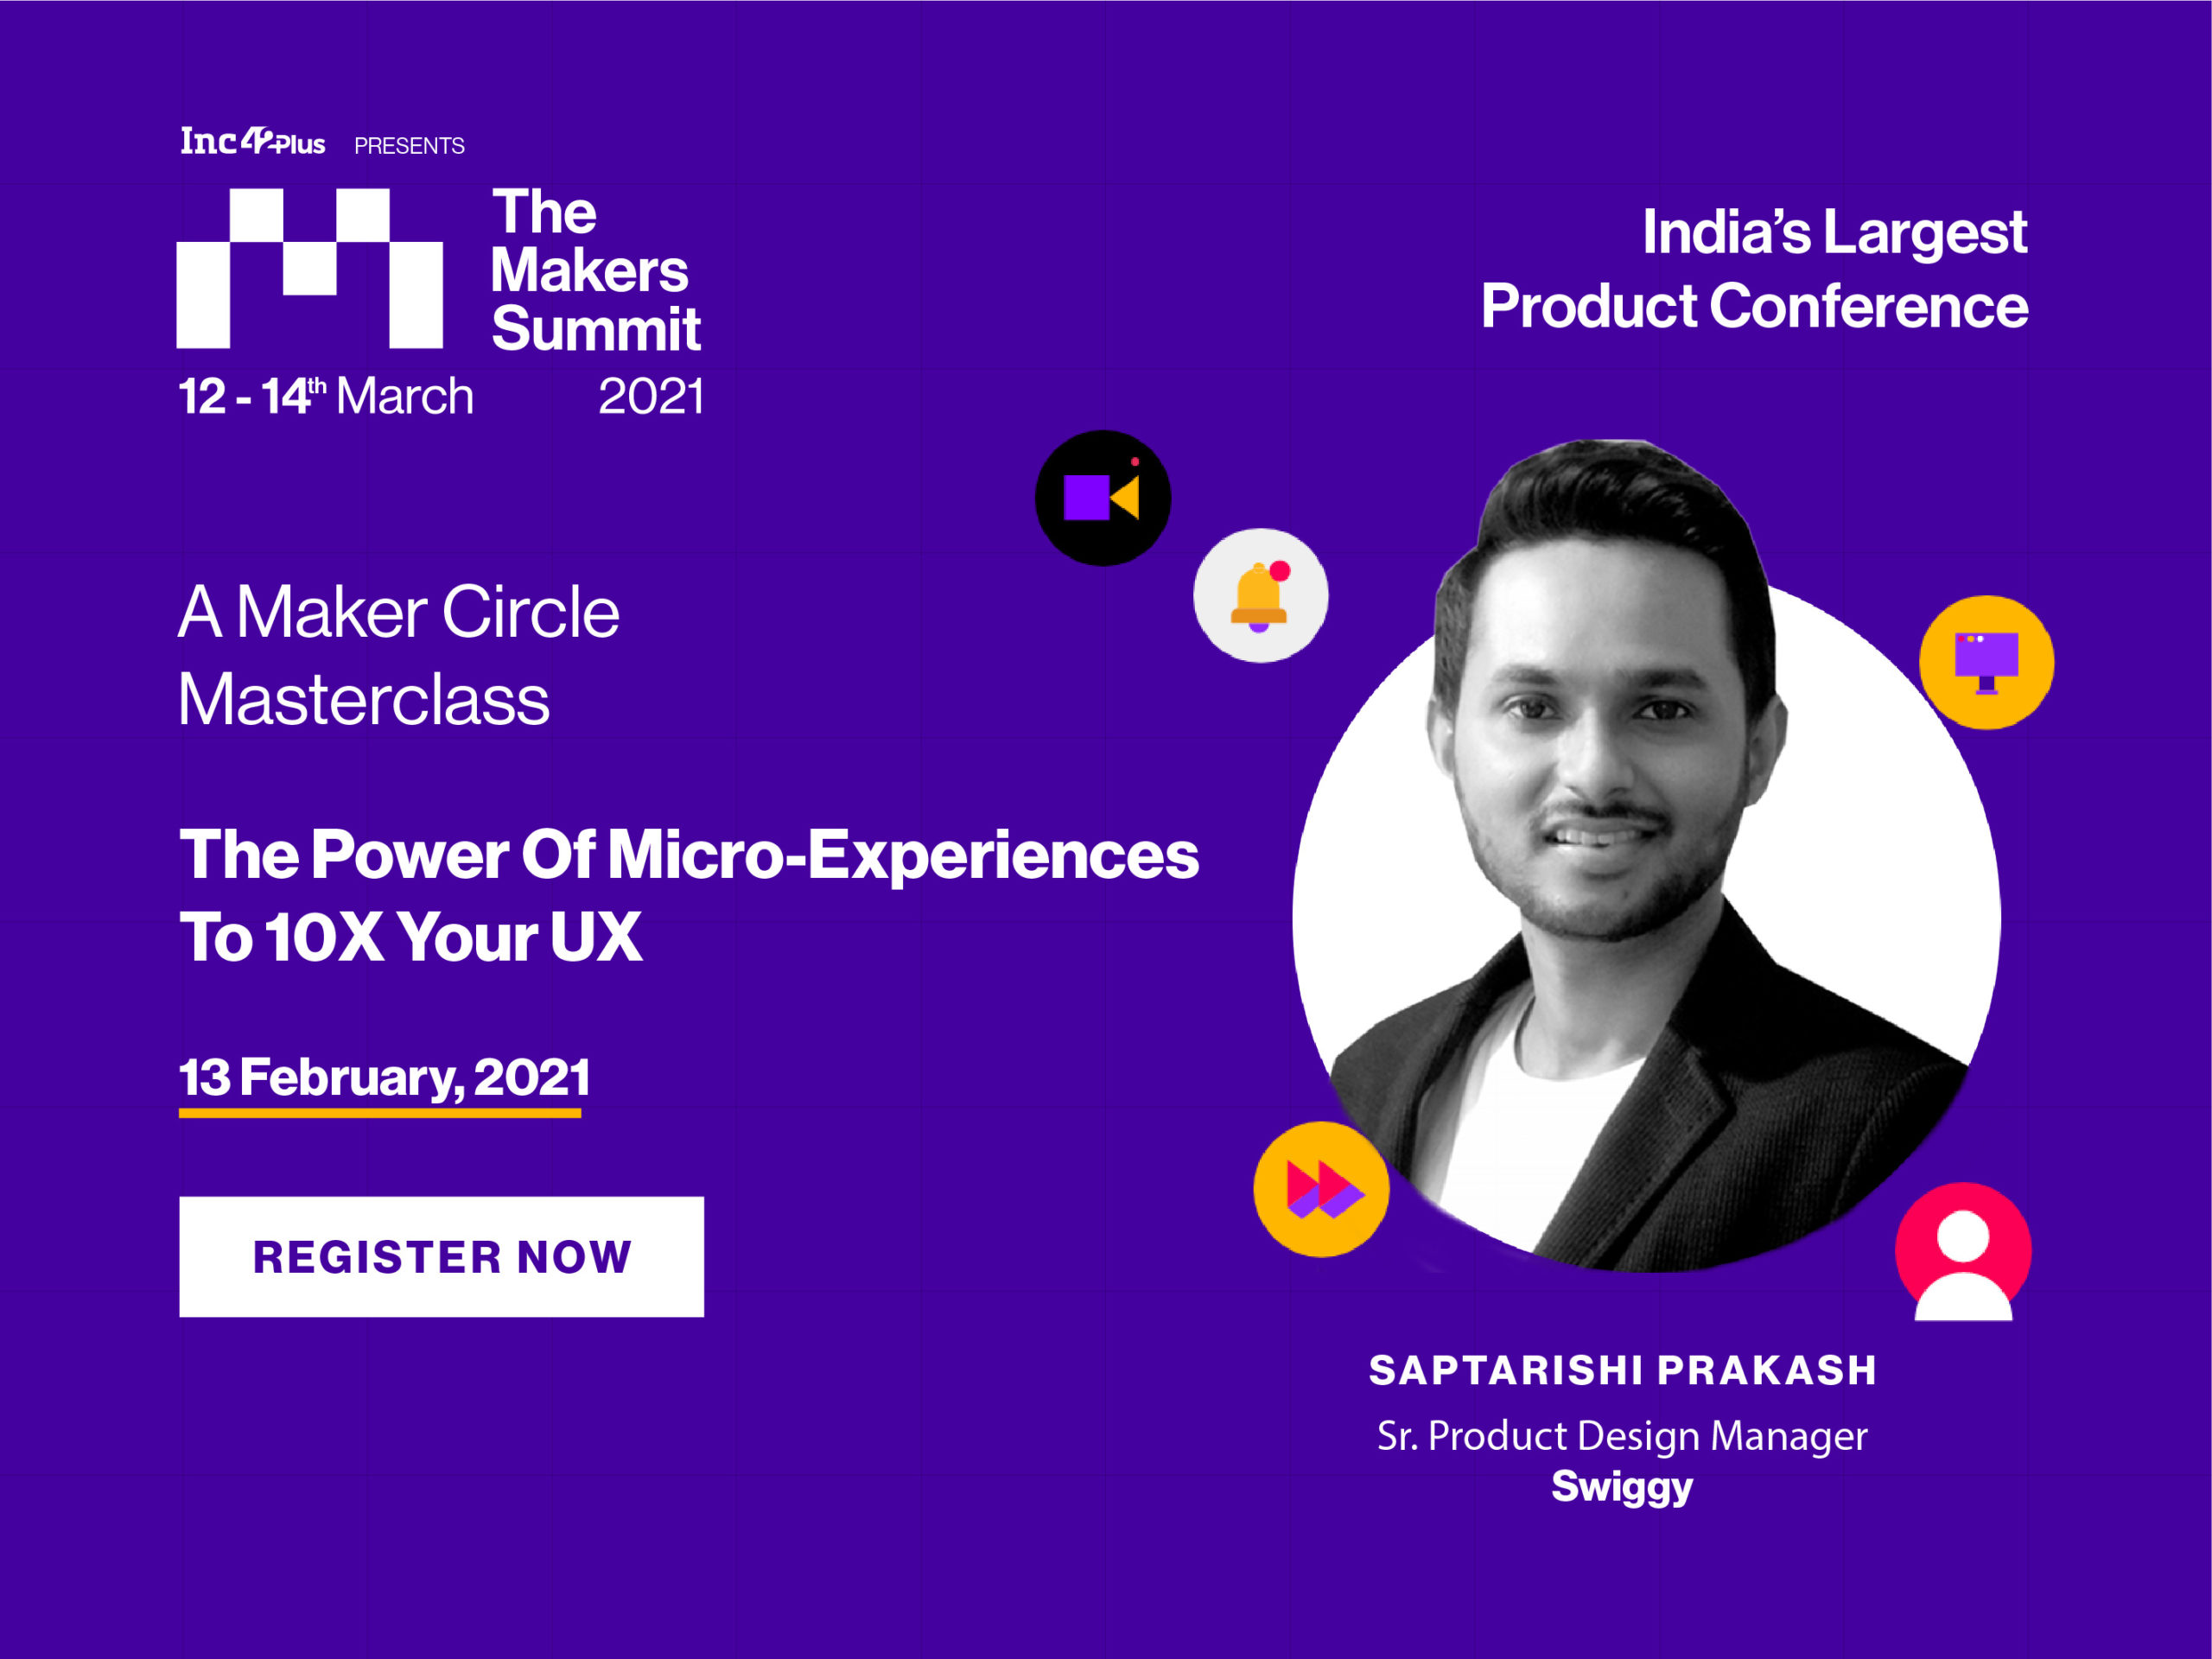 Register For The Masterclass On “The Power Of Micro-Experiences To 10X Your UX”